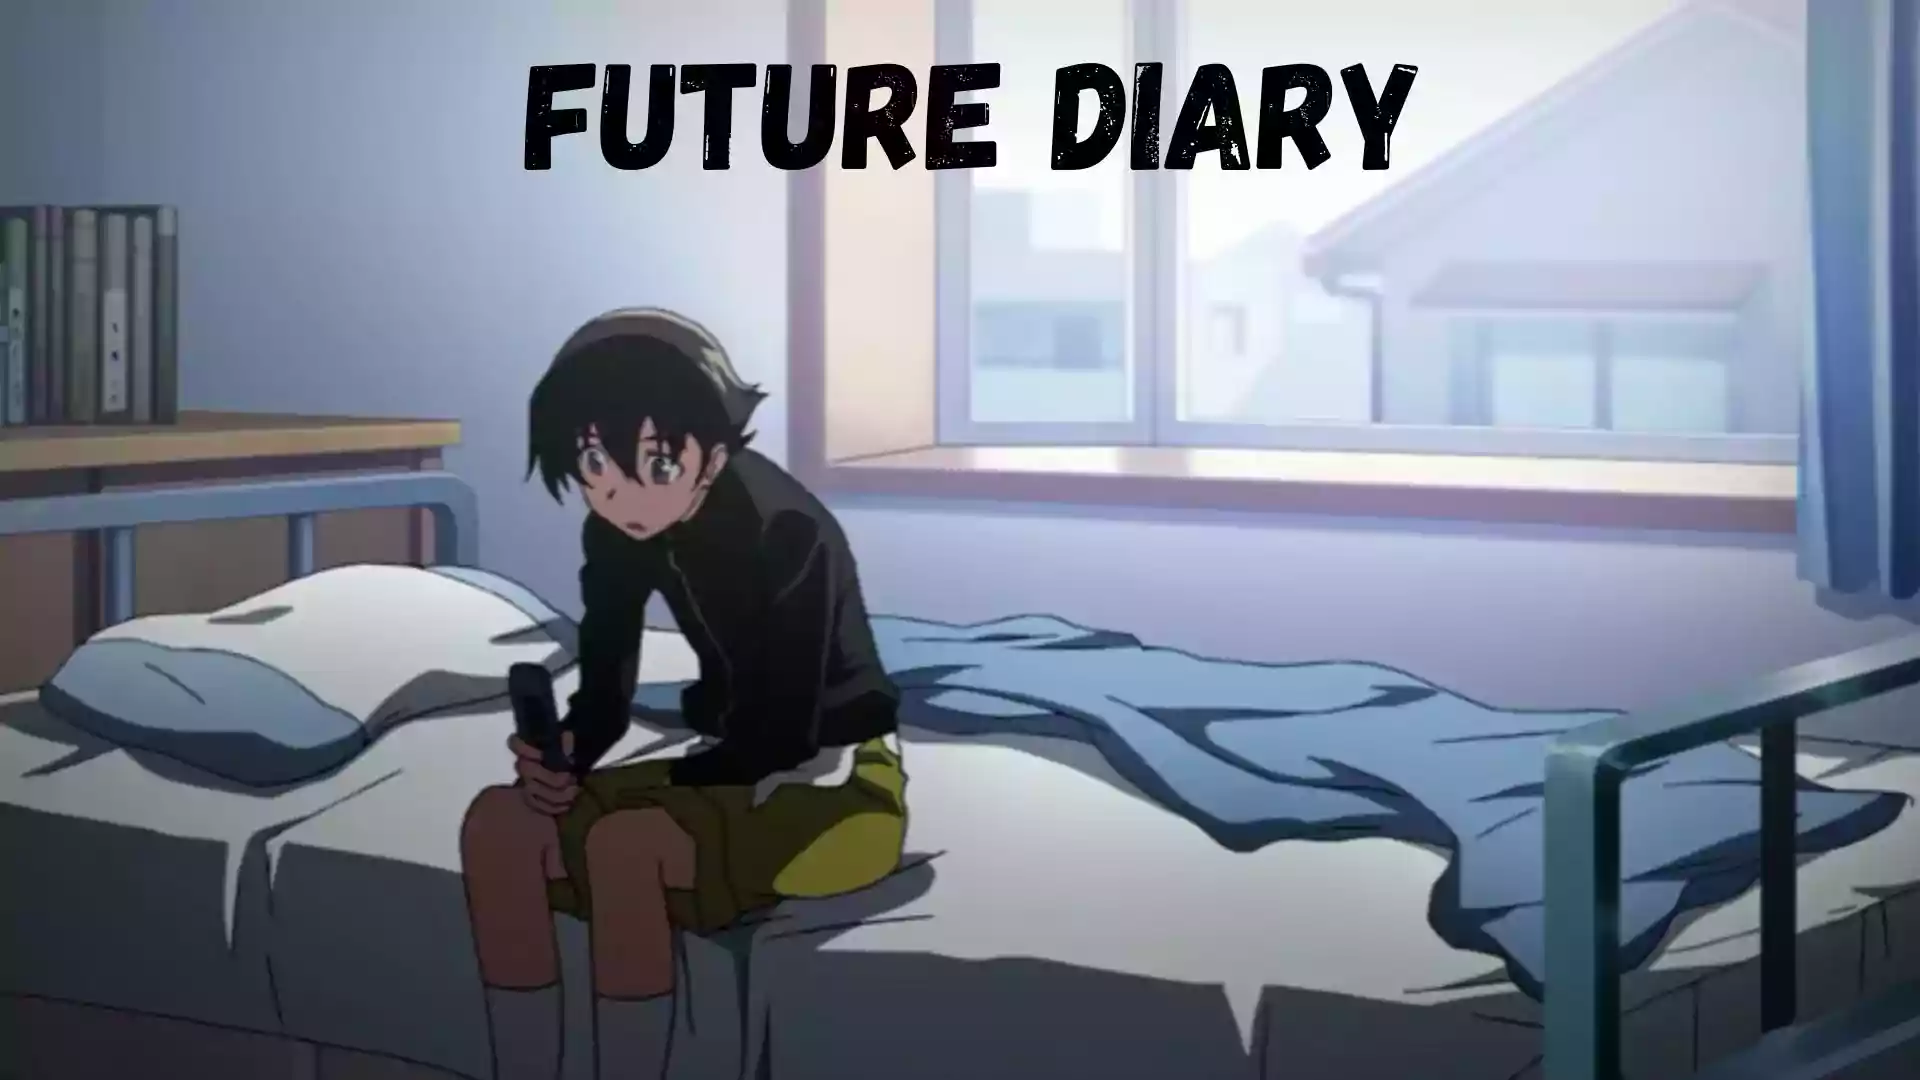 Future Diary Wallpaper and Image